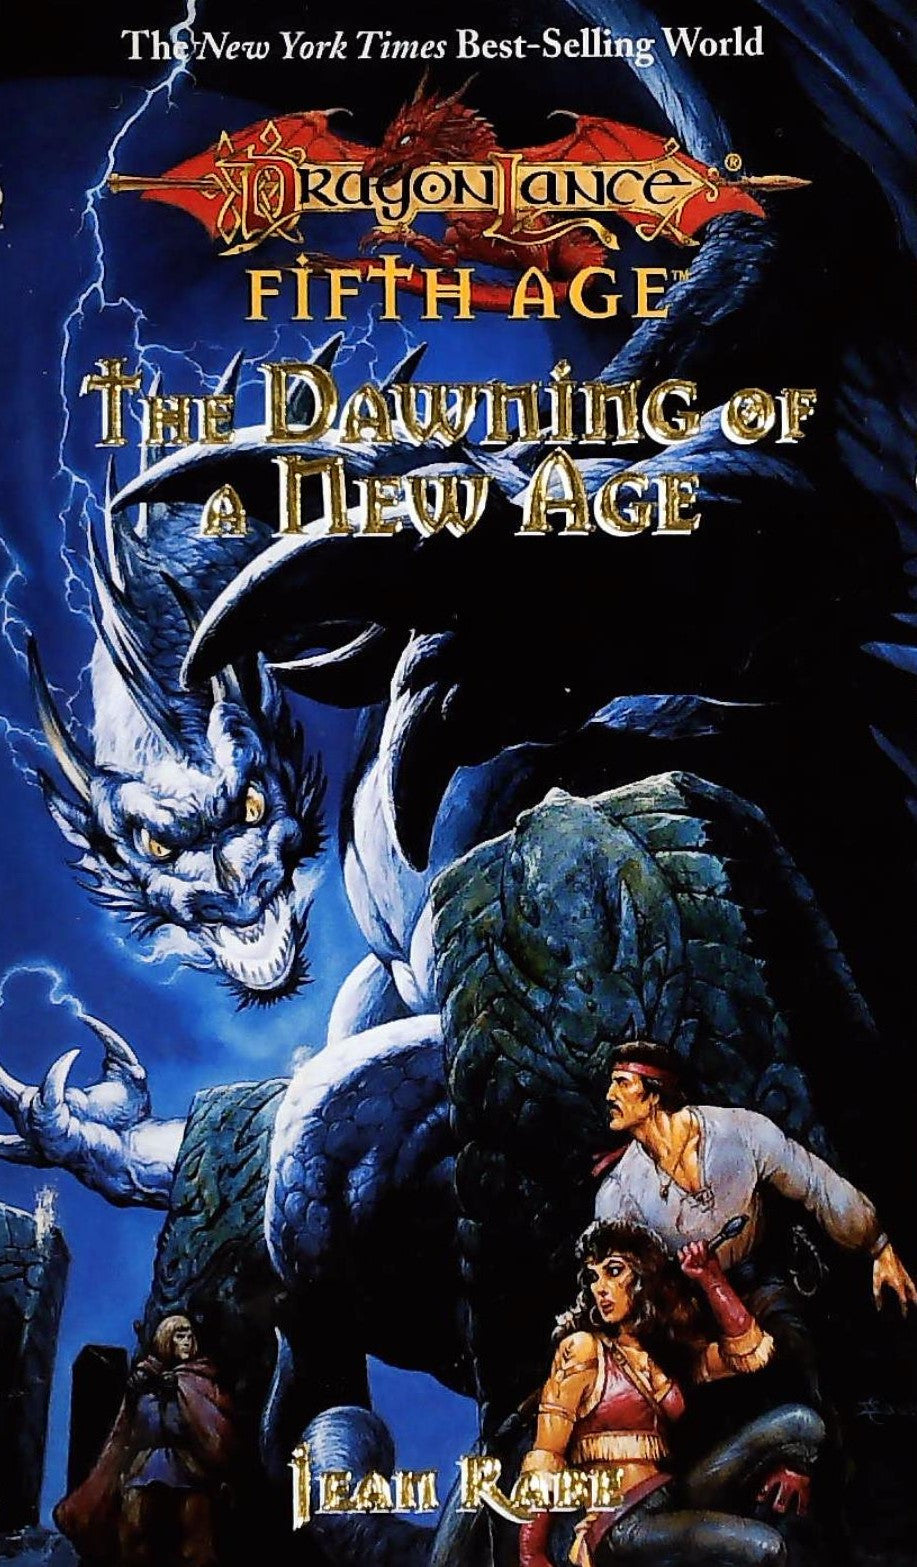 Livre ISBN 0786906162 DragonLance : Fift Age : The Dawning of a New Age (Jean Rabe)